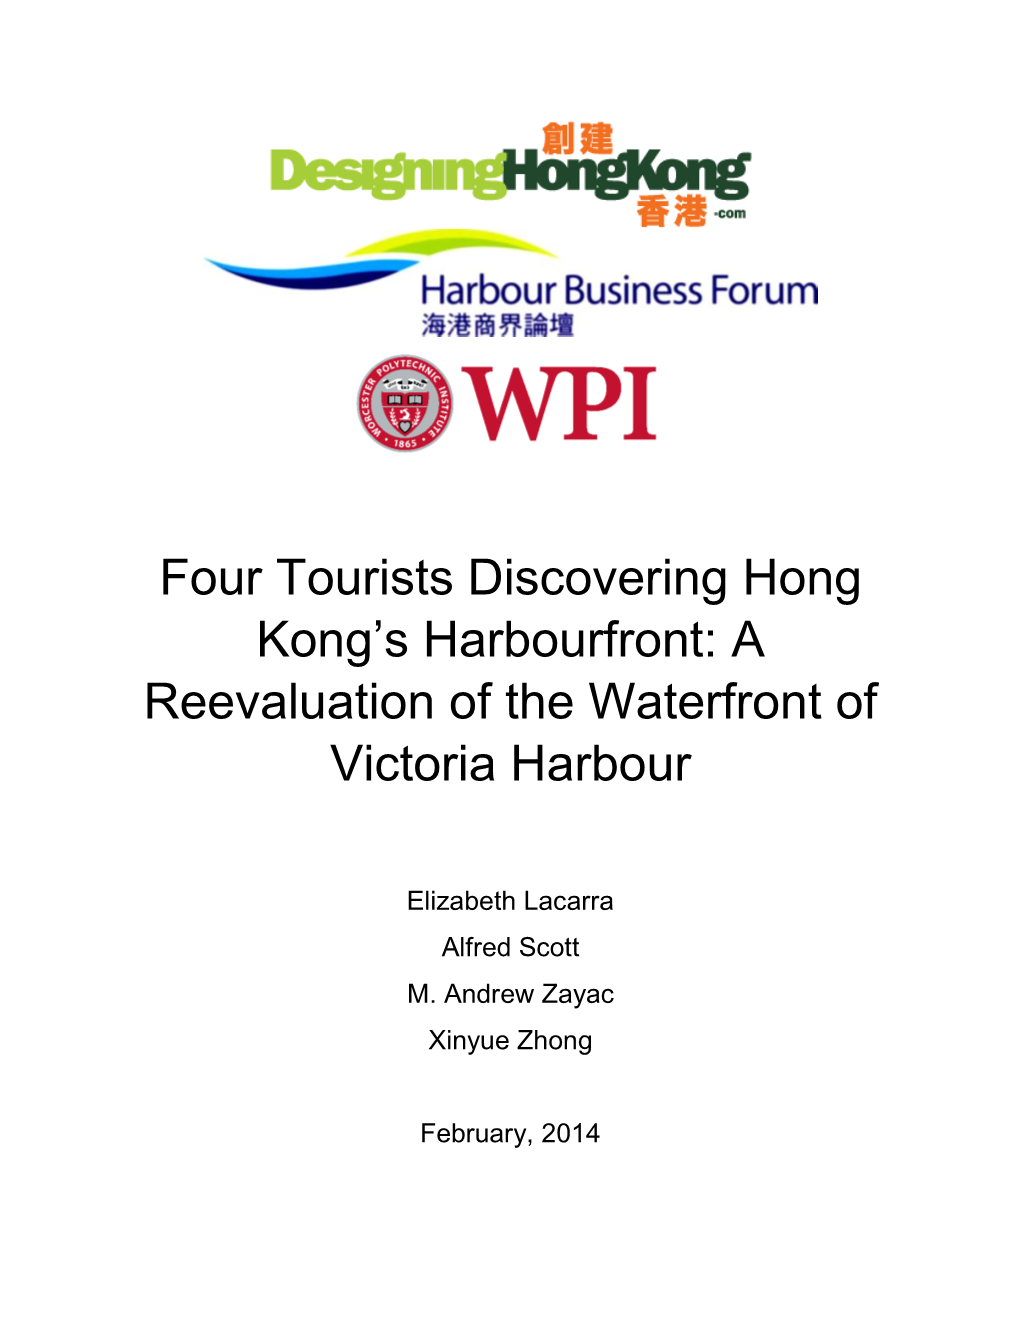 Four Tourists Discovering Hong Kong's Harbourfront: A